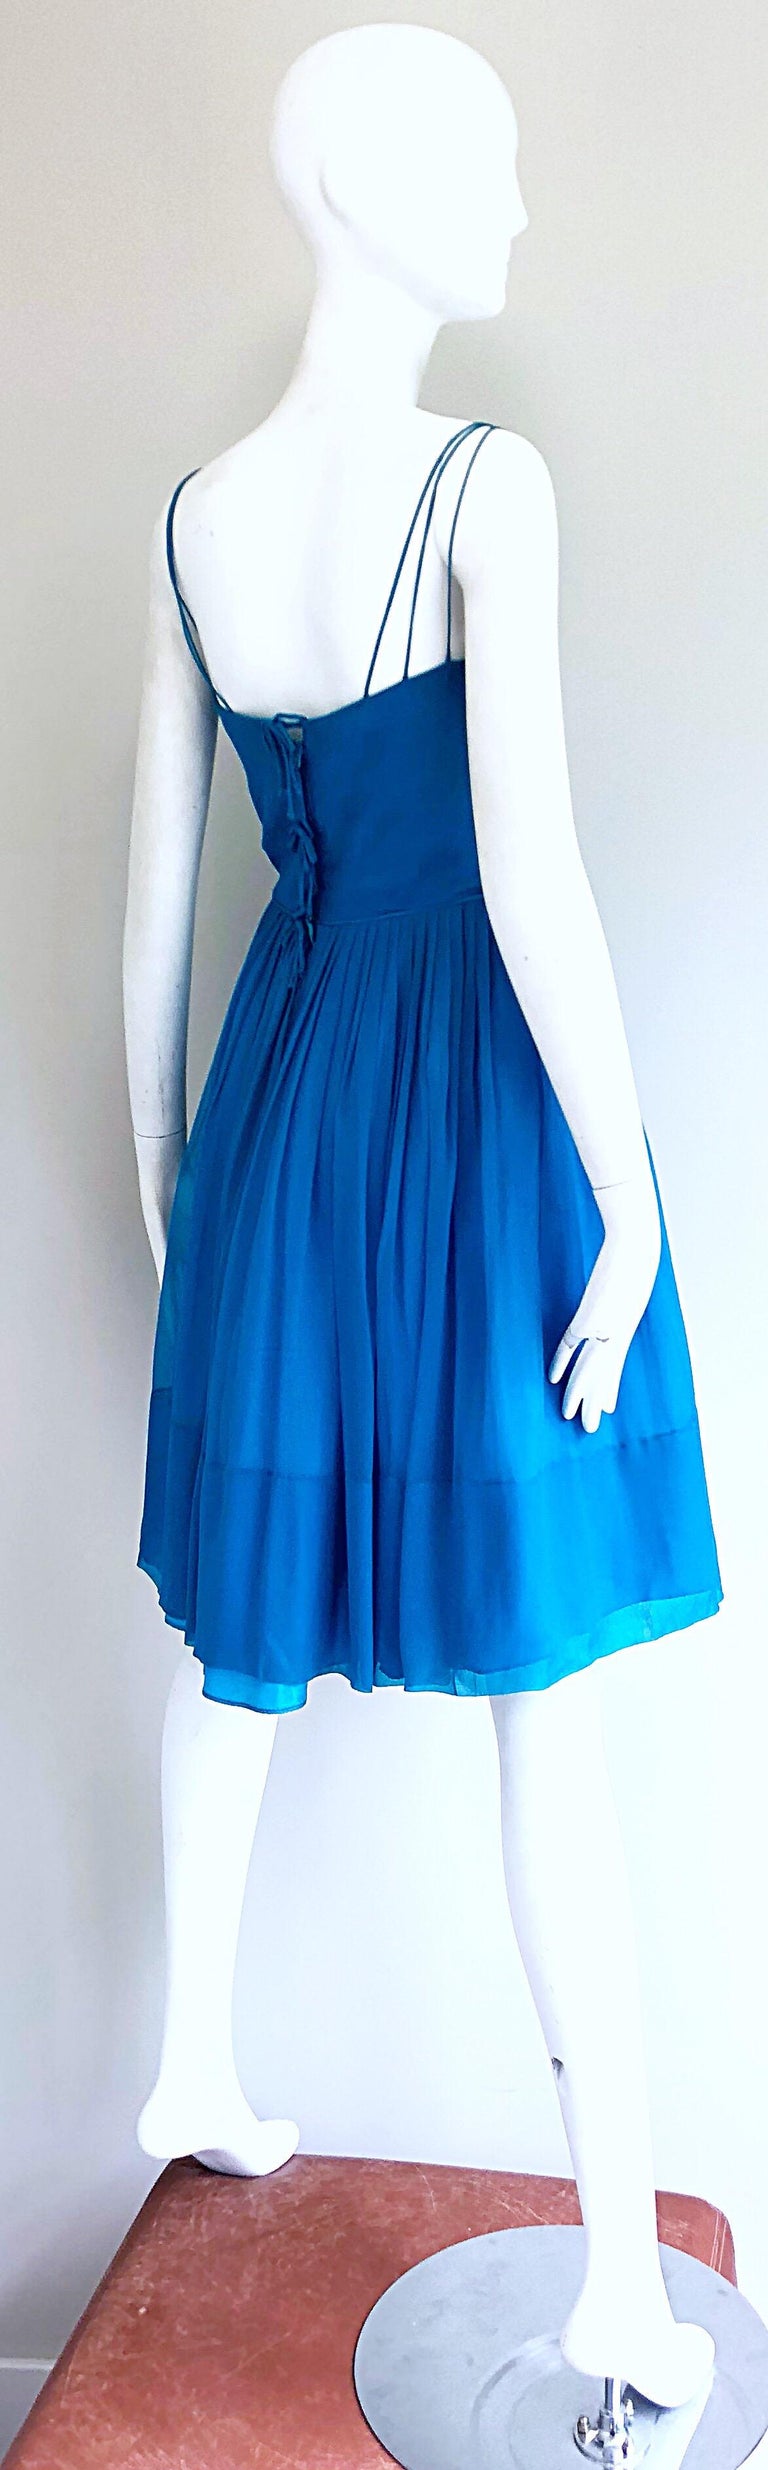 1950s Turquoise Blue Silk Chiffon Nude Illusion Fit n' Flare Vintage ...